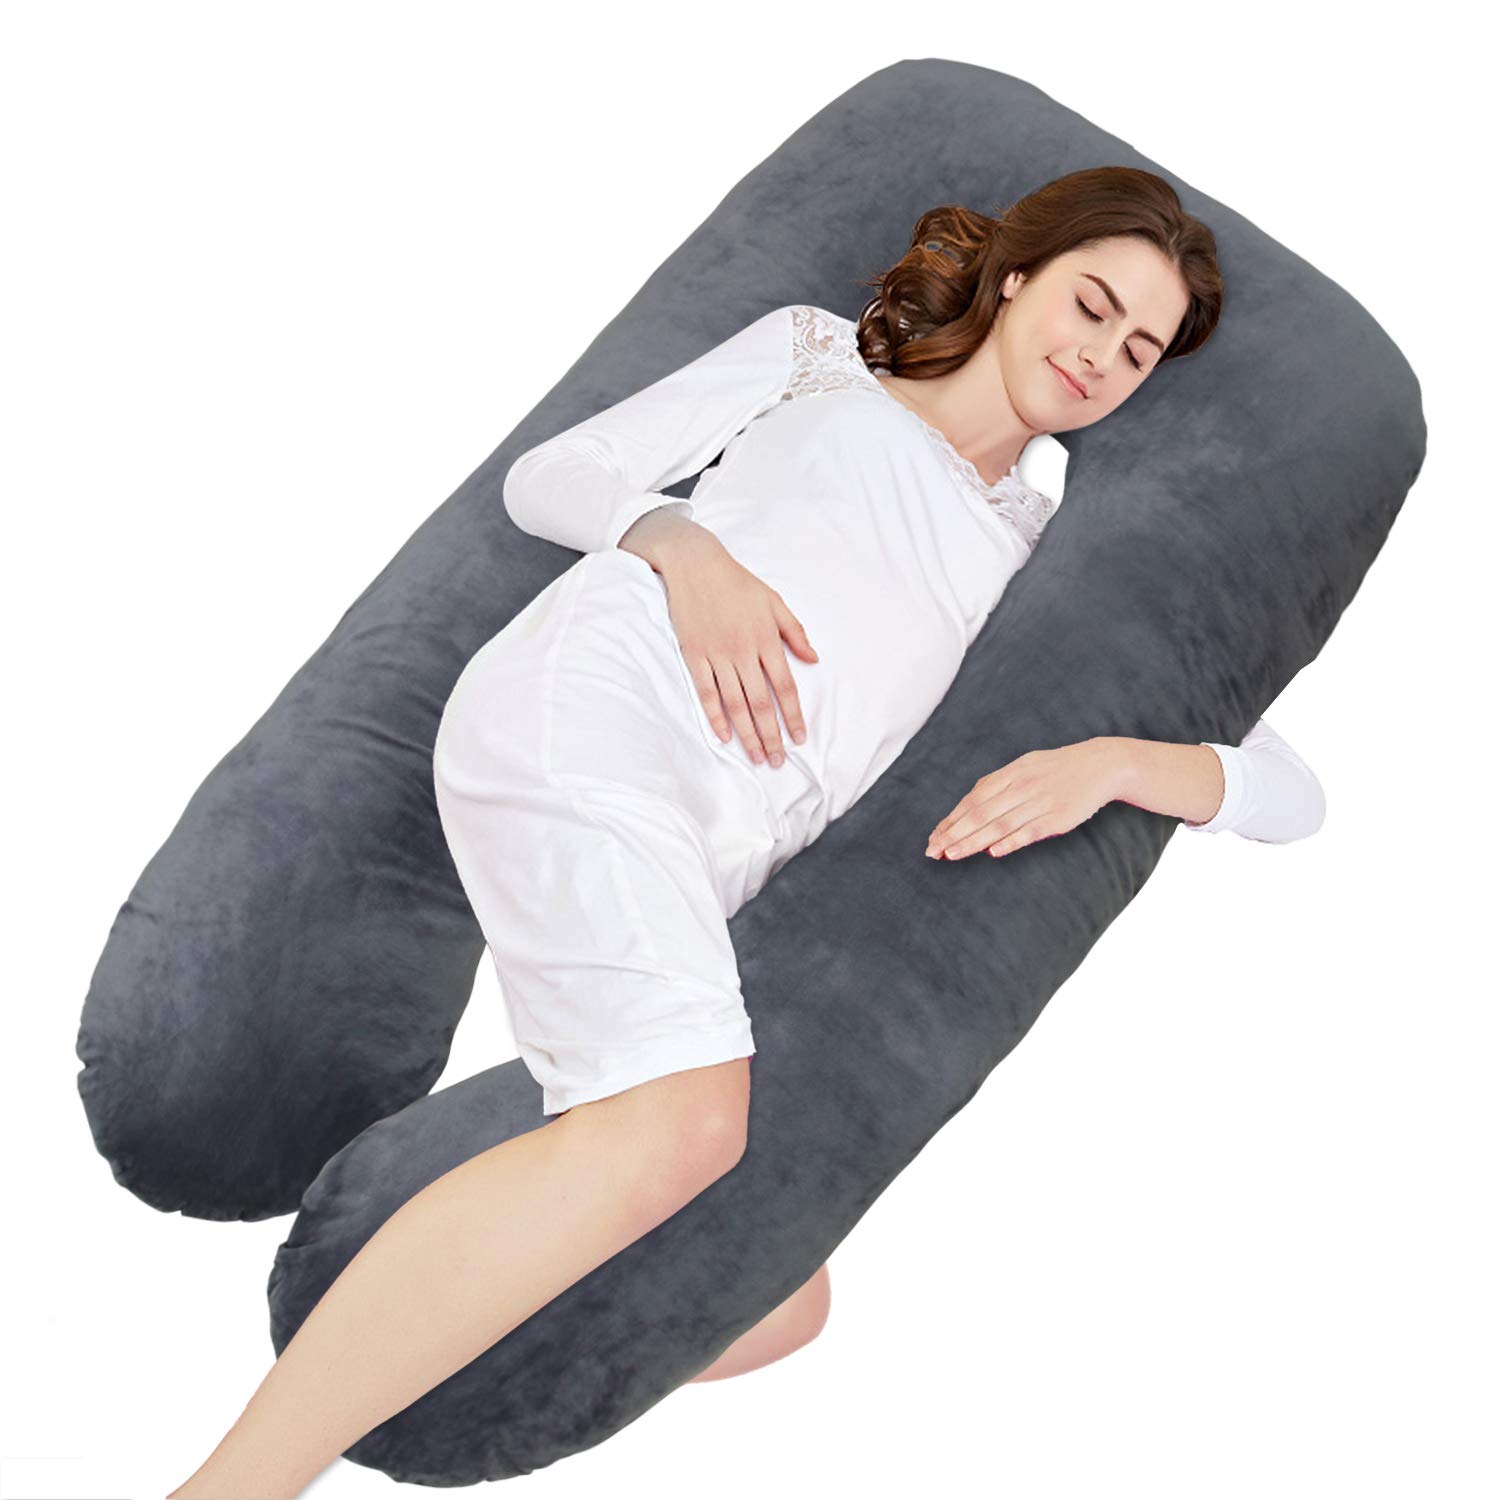 NO LONGER SOLD – Onory Full Body Pregnancy Pillow